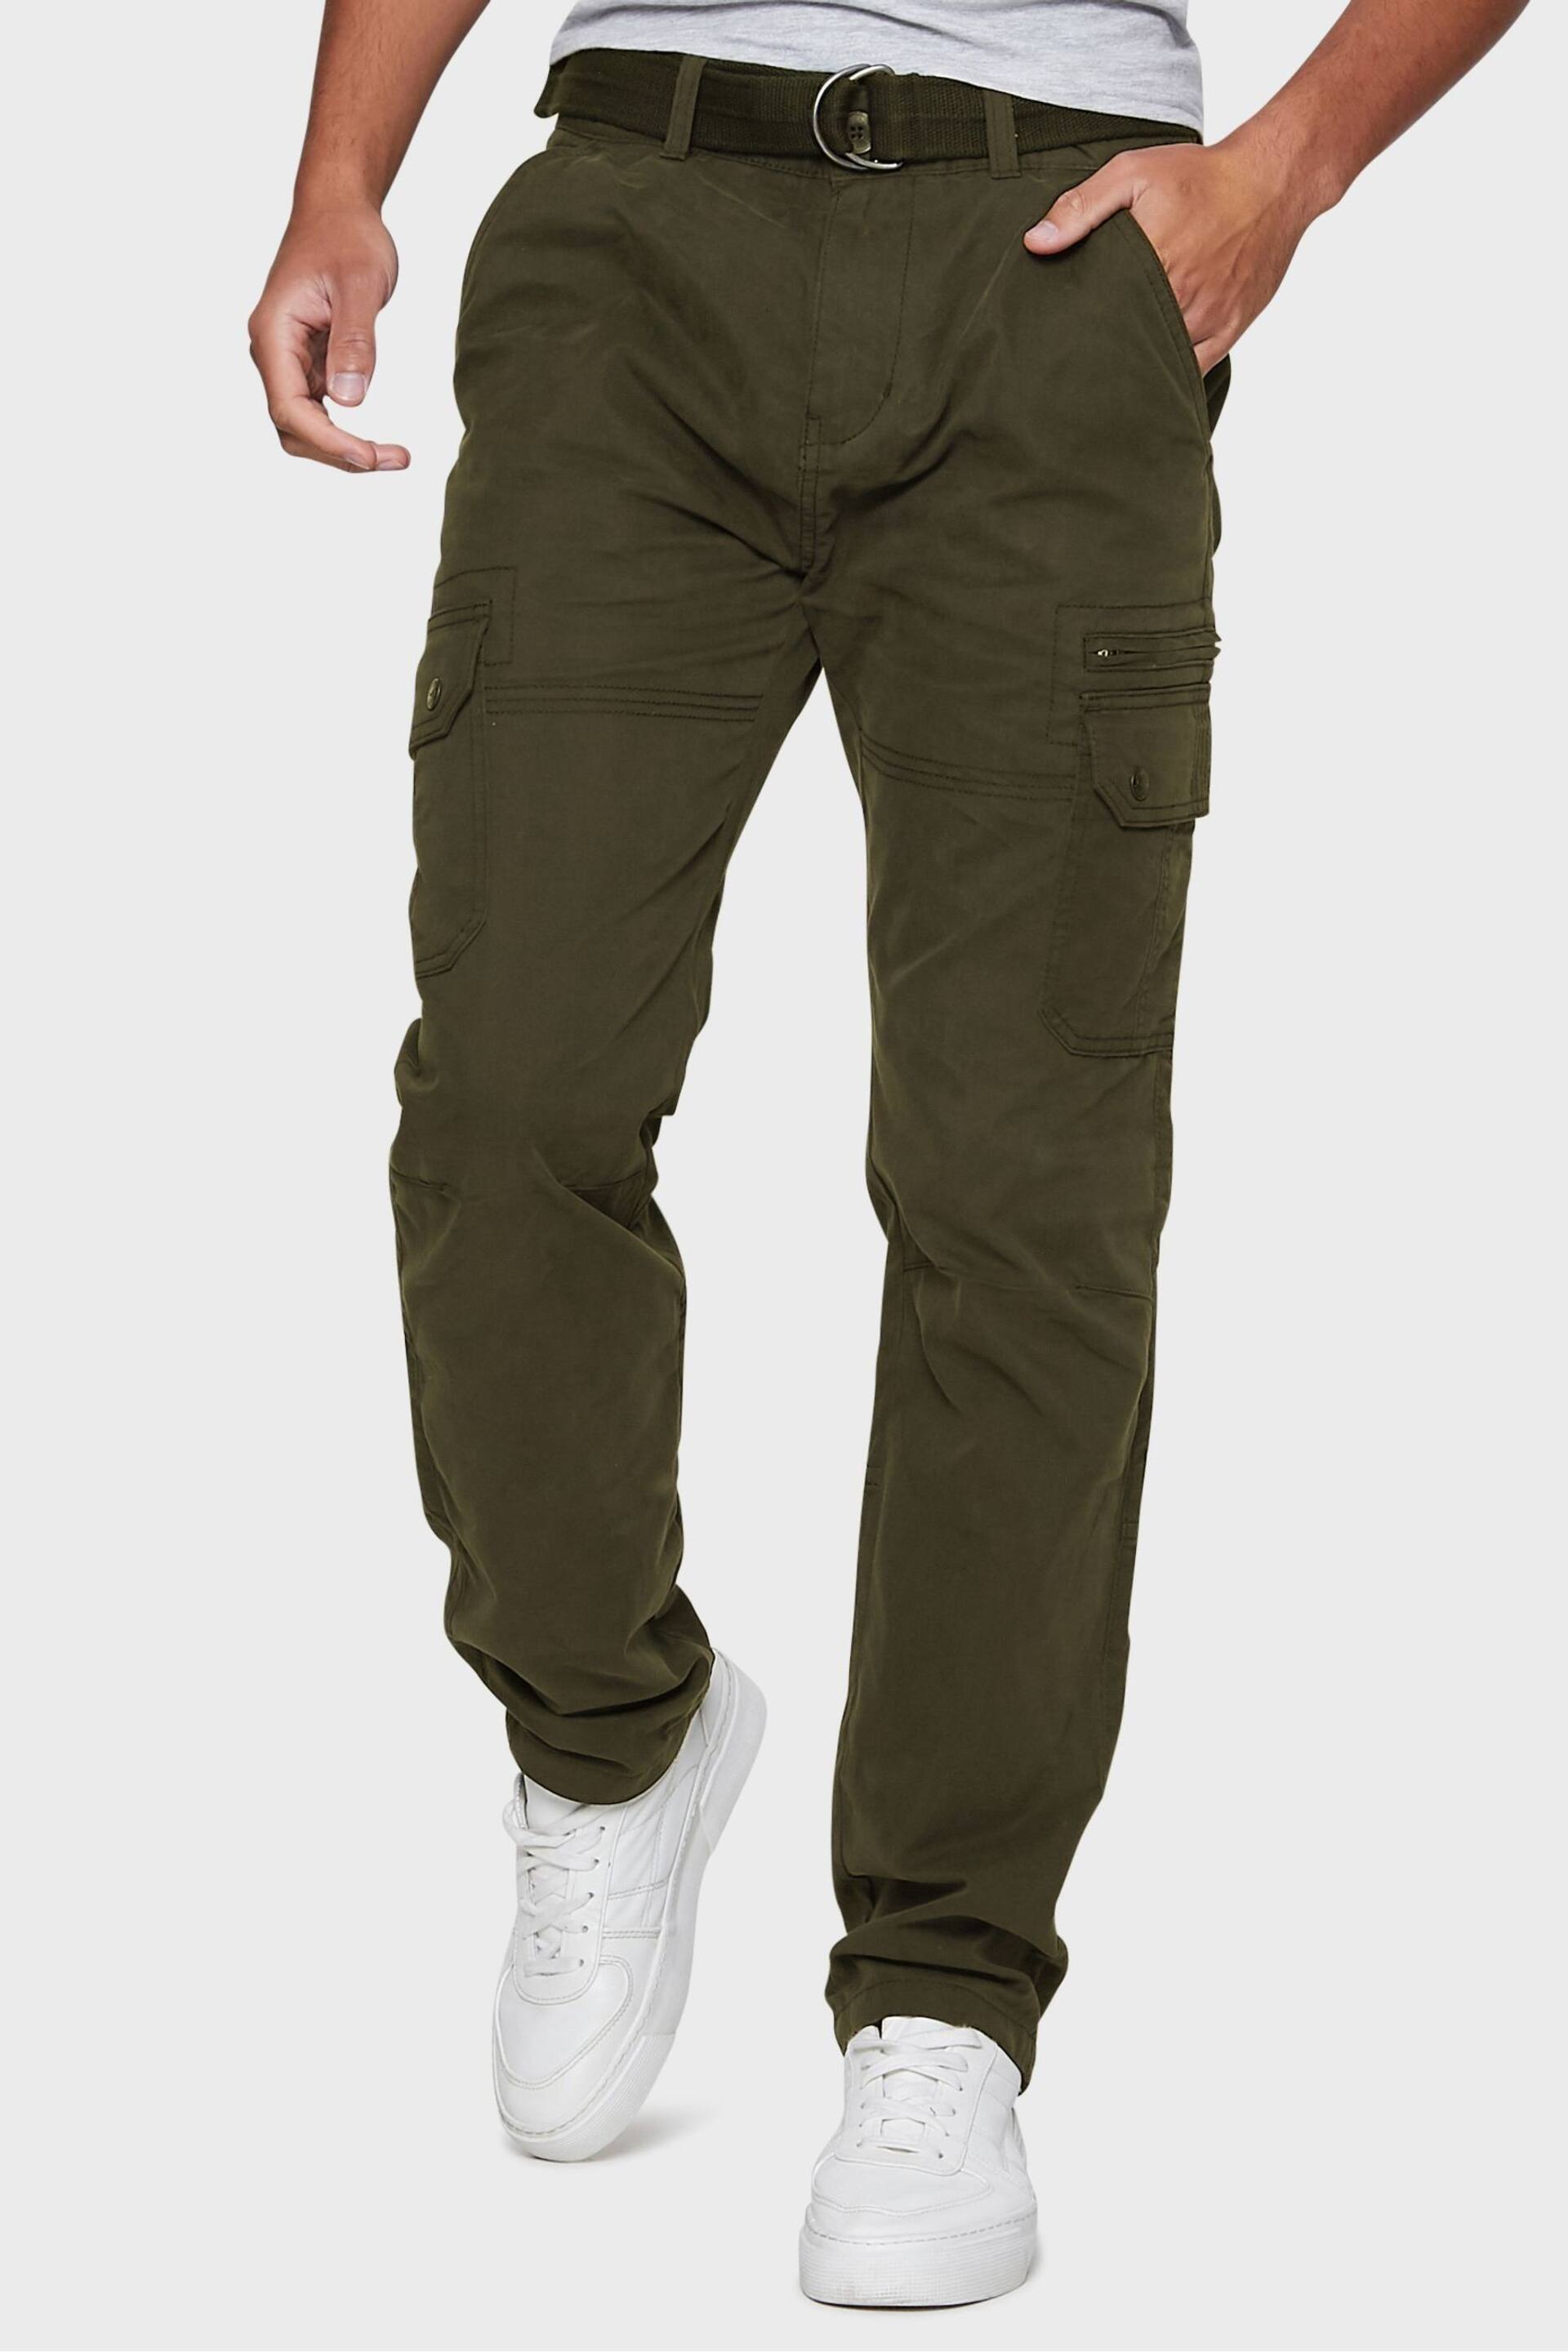 Threadbare Green Cotton Blend Belted Cargo Trousers - Image 1 of 4